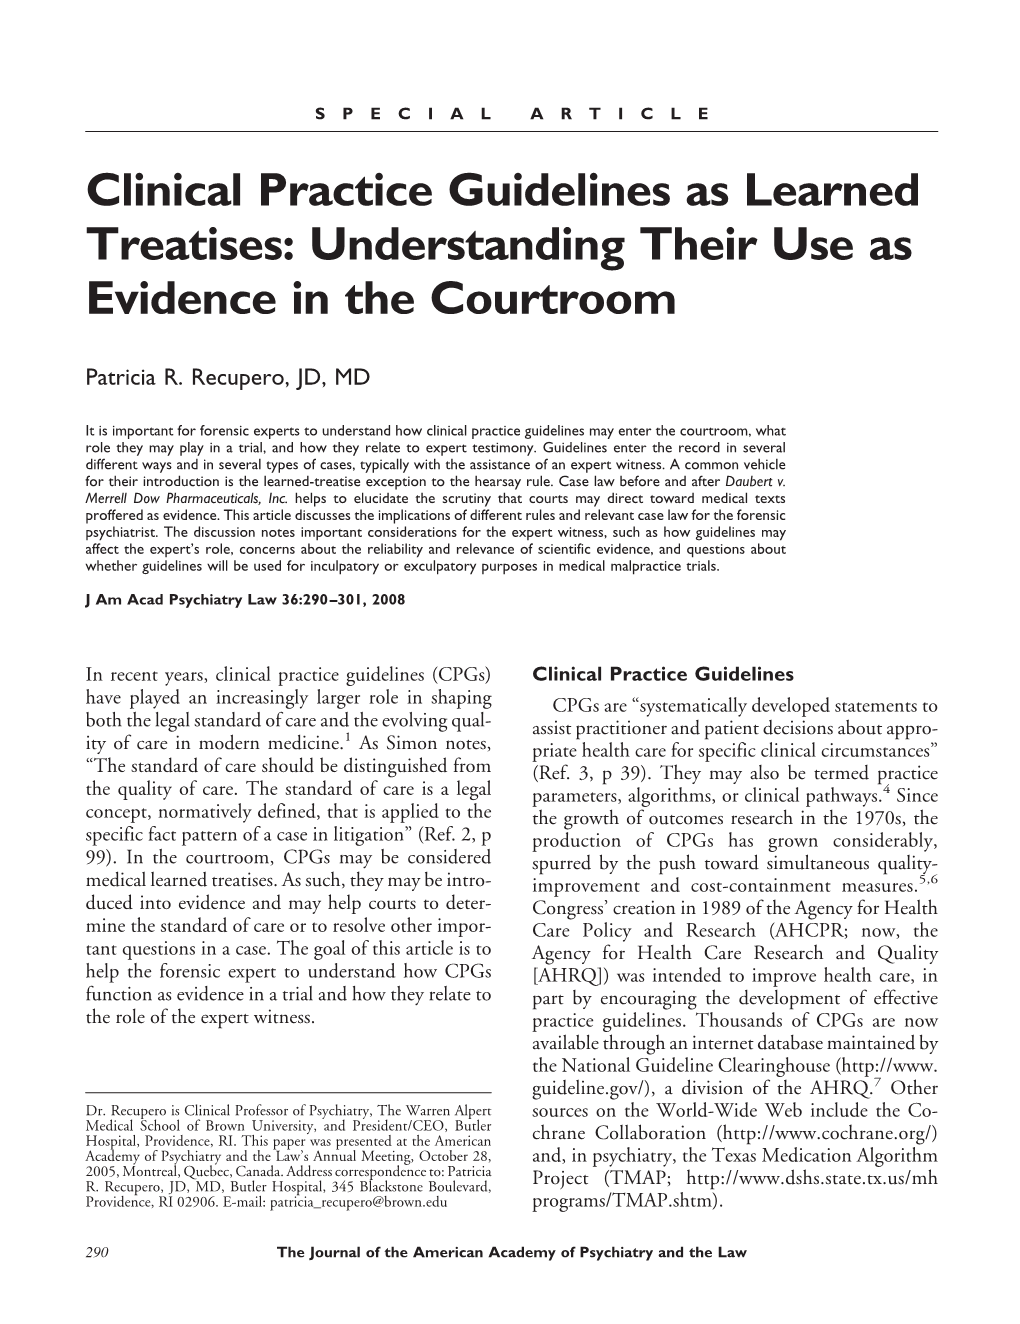 Clinical Practice Guidelines As Learned Treatises: Understanding Their Use As Evidence in the Courtroom